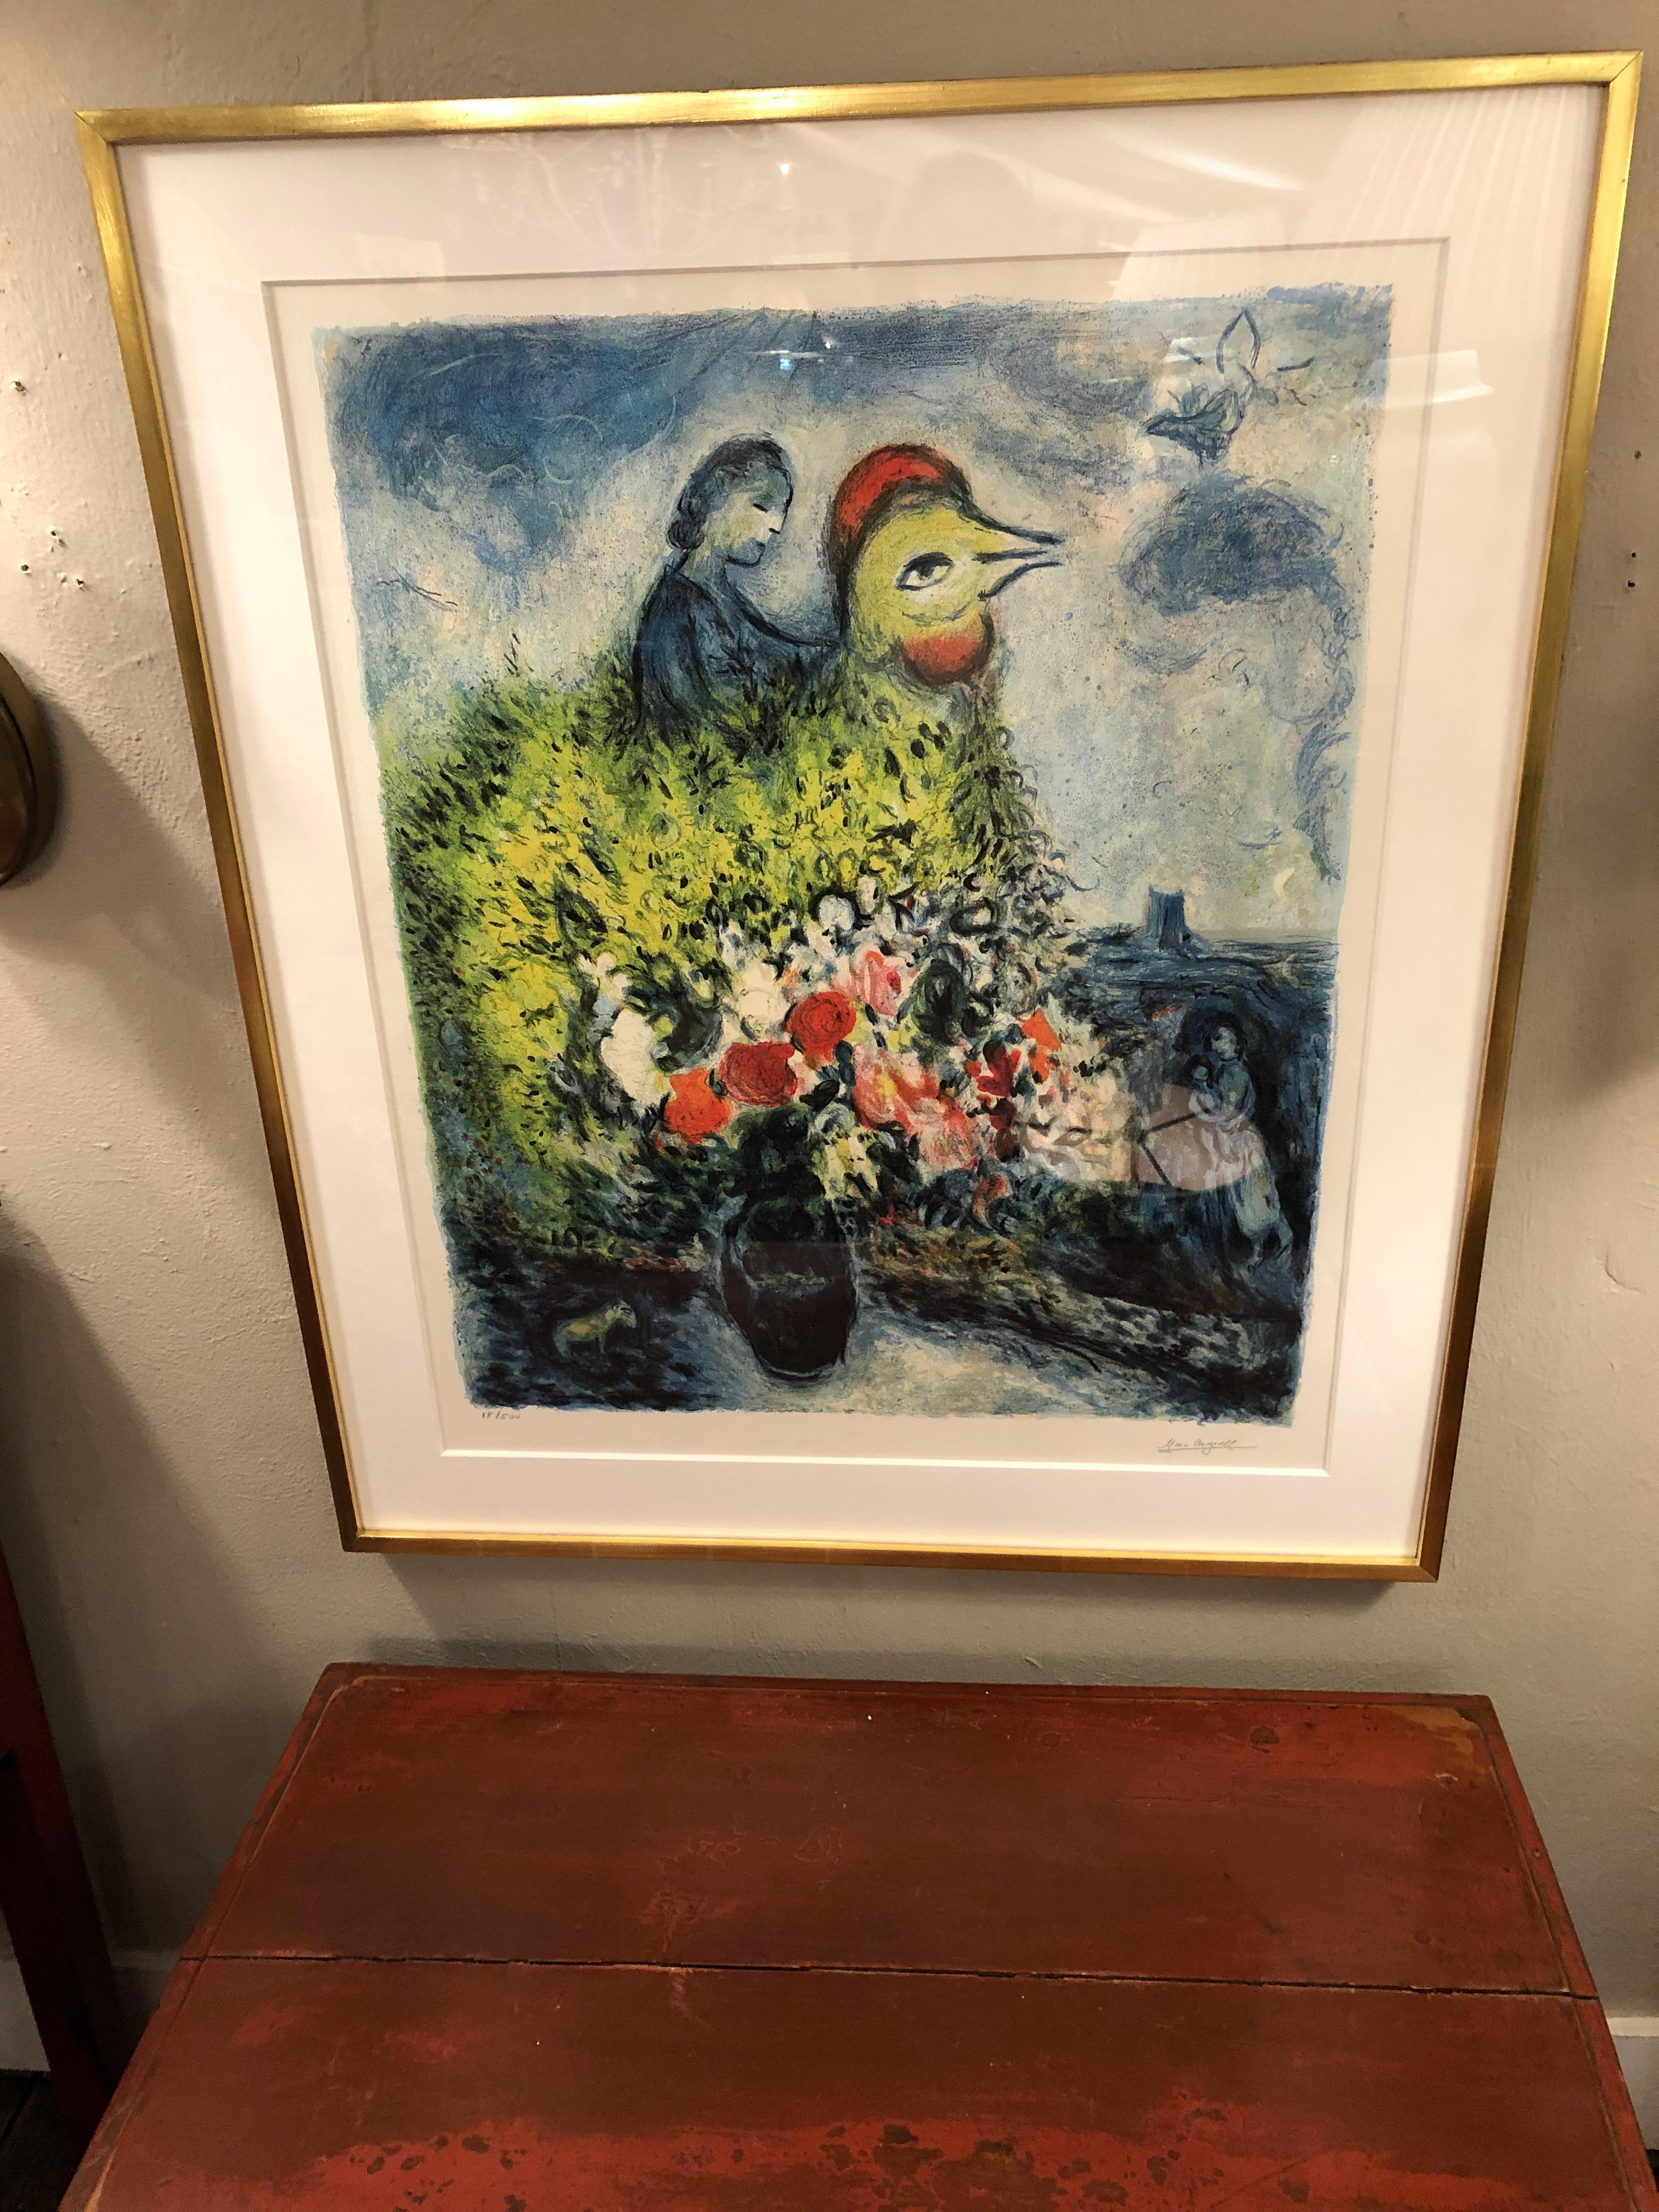 A woman is riding a top a large rooster with a yellow bouquet in this whimsical fantastical limited edition print by Marc Chagall (Russian/French, 1887-1985) 
# 18/500 limited edition, signed by the artist, embossed stamp by the signature.
Newly